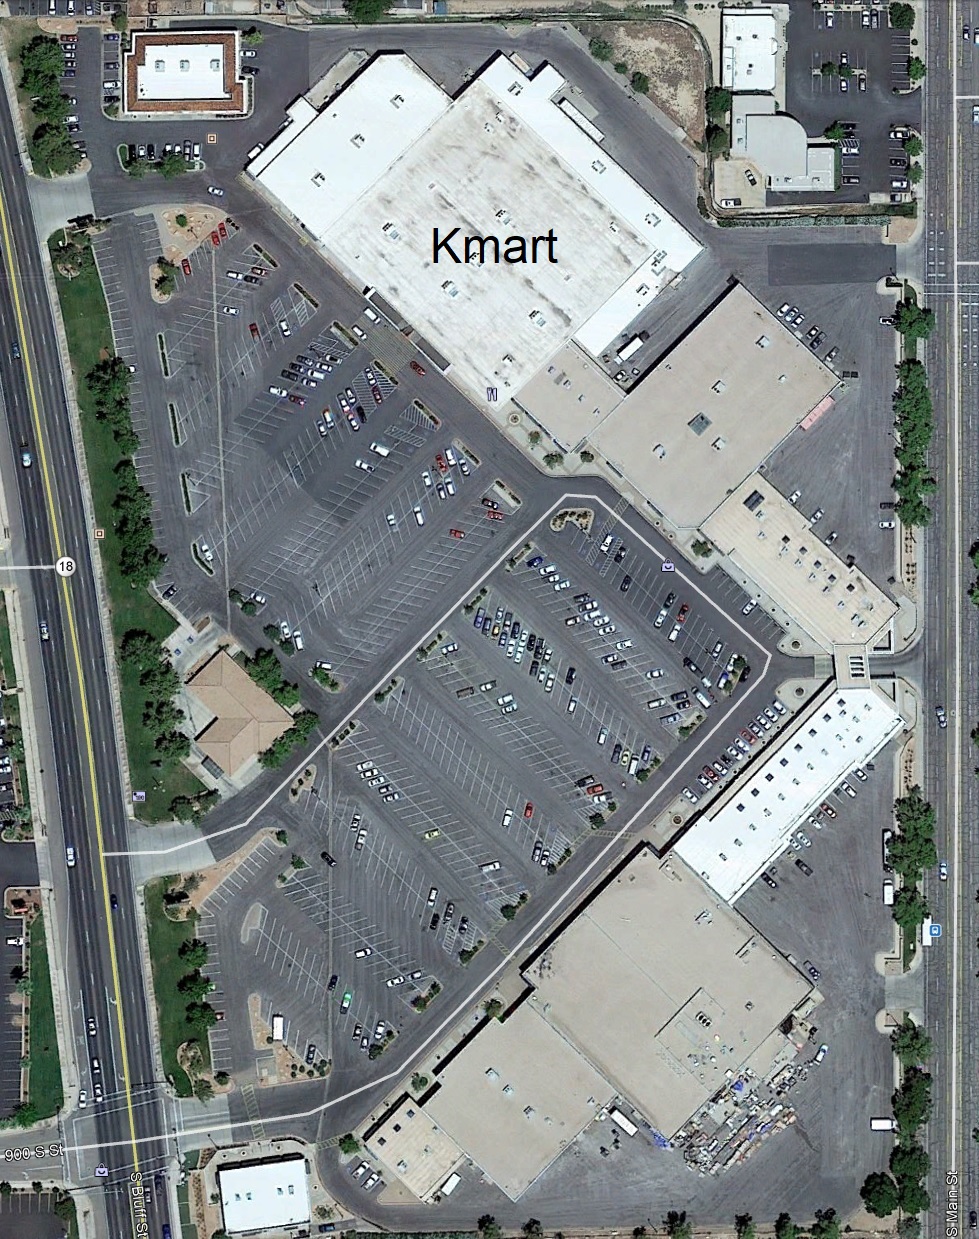 Aerial view of the Kmart store